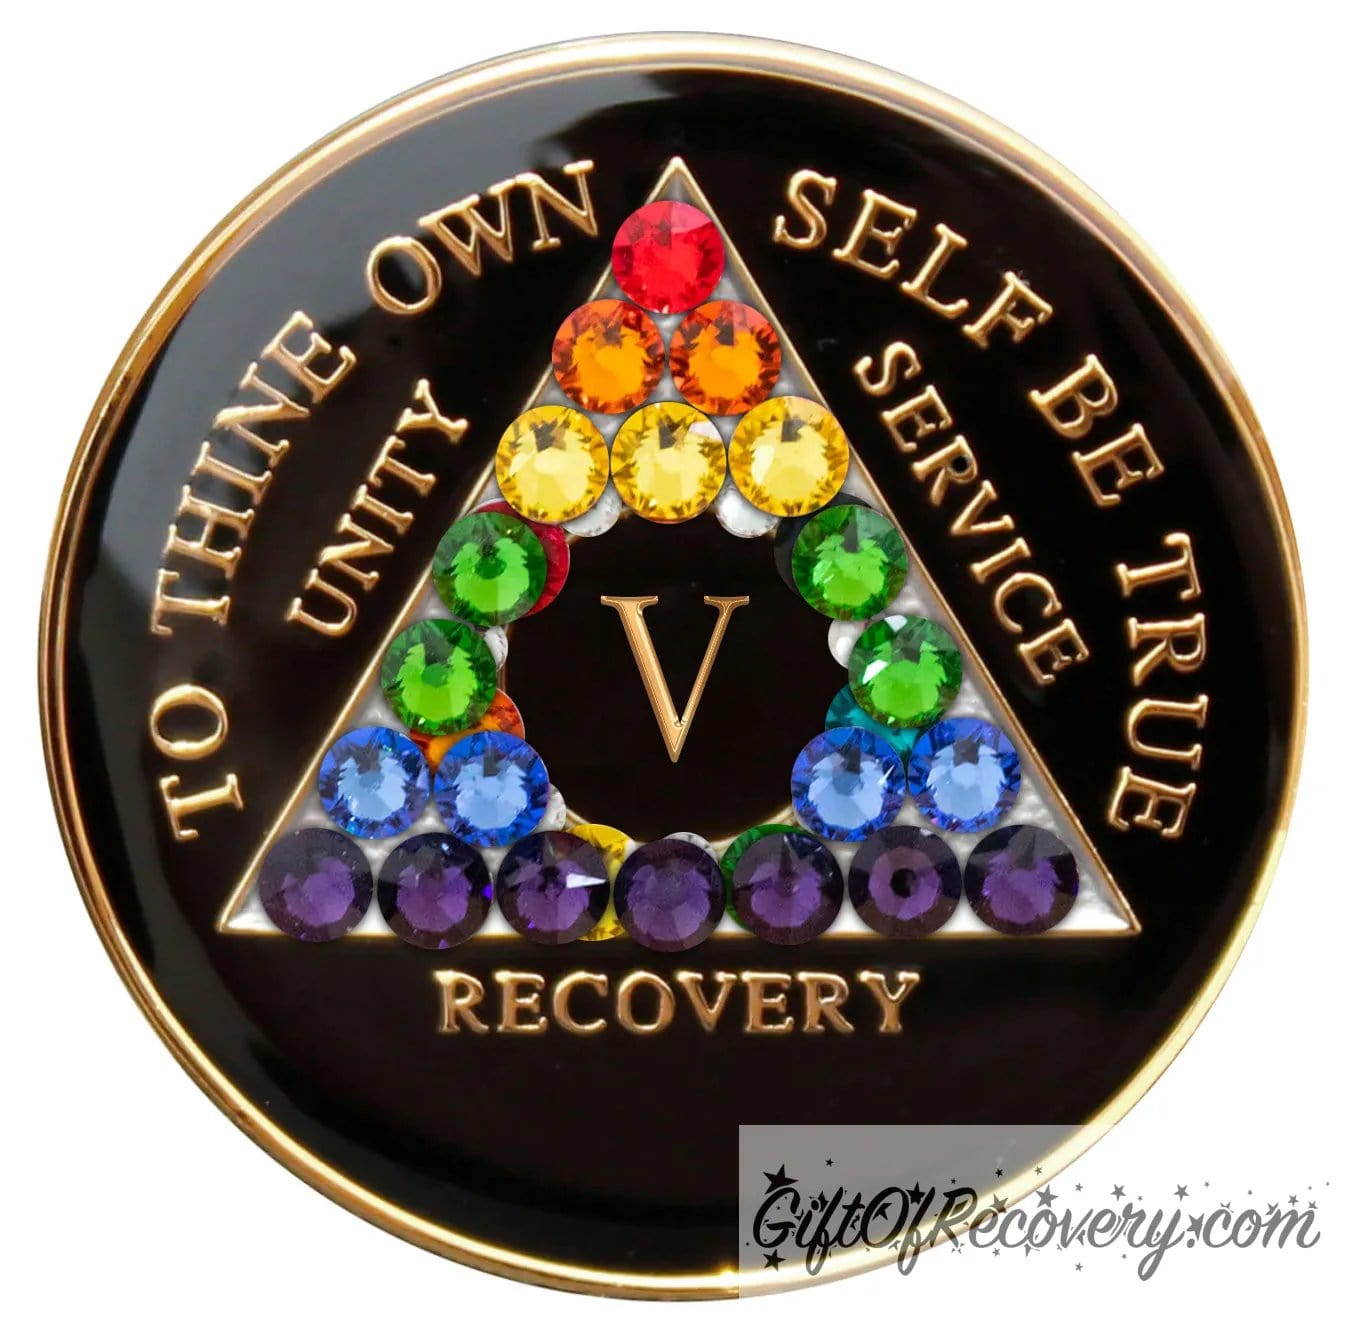 5 year AA medallion with 21 rainbow genuine crystals to represent the LBGTQIA+ community, show your pride with this Black onyx resin sealed recovery medallion that has 14k gold plated brass lettering of to thine own self be true, unity, service, recovery, and the roman numeral.